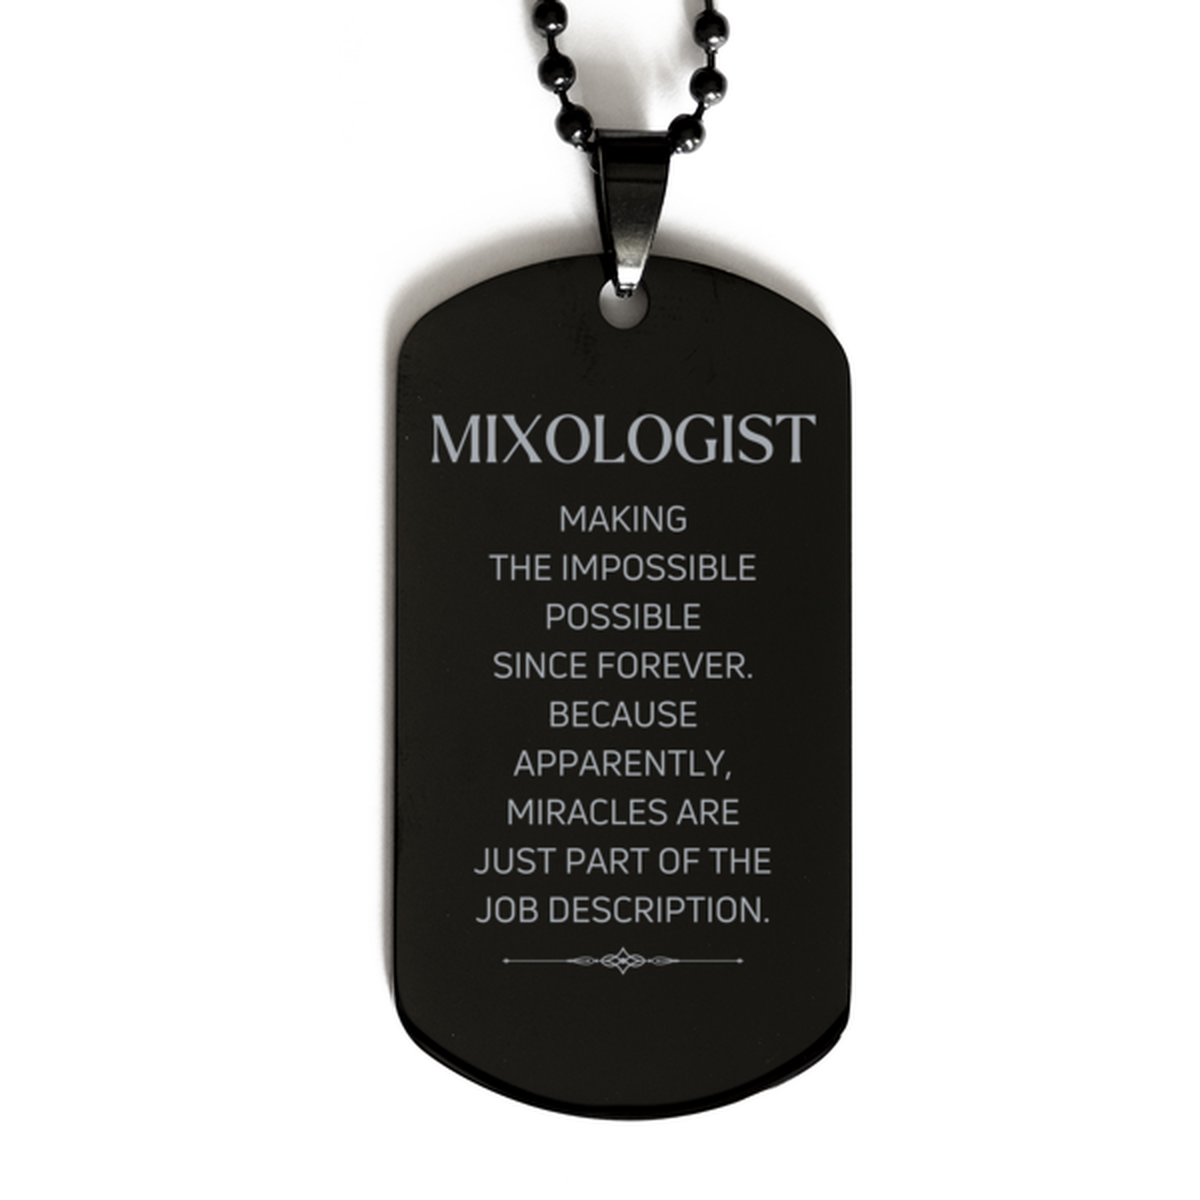 Funny Mixologist Gifts, Miracles are just part of the job description, Inspirational Birthday Black Dog Tag For Mixologist, Men, Women, Coworkers, Friends, Boss